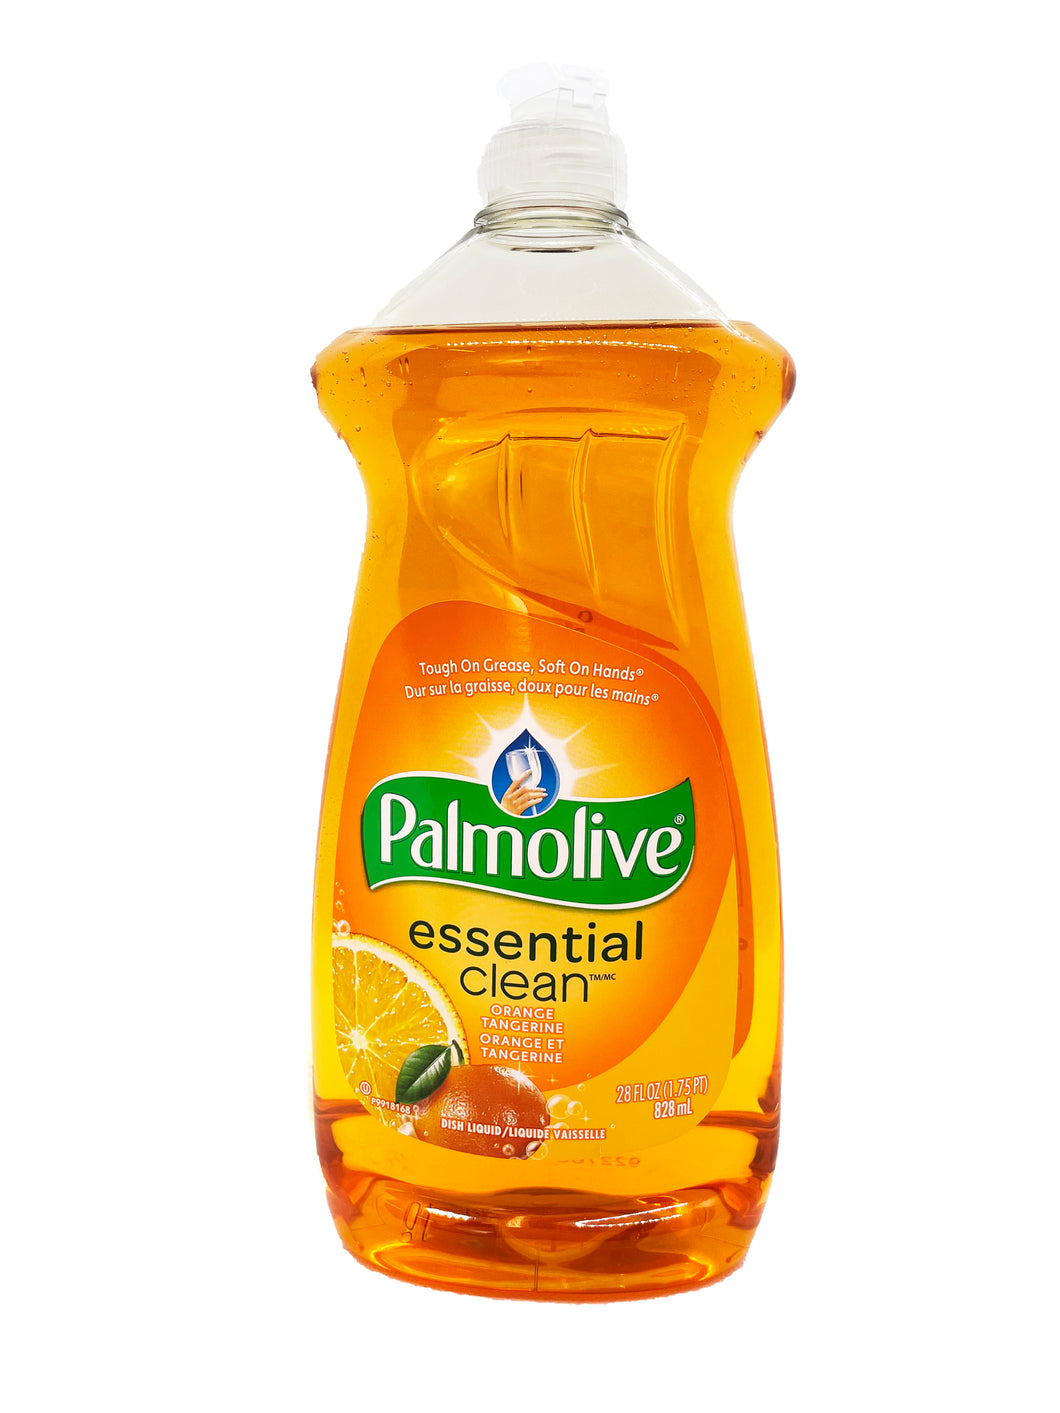 Palmolive dish soap easily cuts grease allowing you to effortlessly clean more greasy dishes while fighting odour. This solution allows you to remove 24 hours of stuck-on food and leave a residue-free clean.